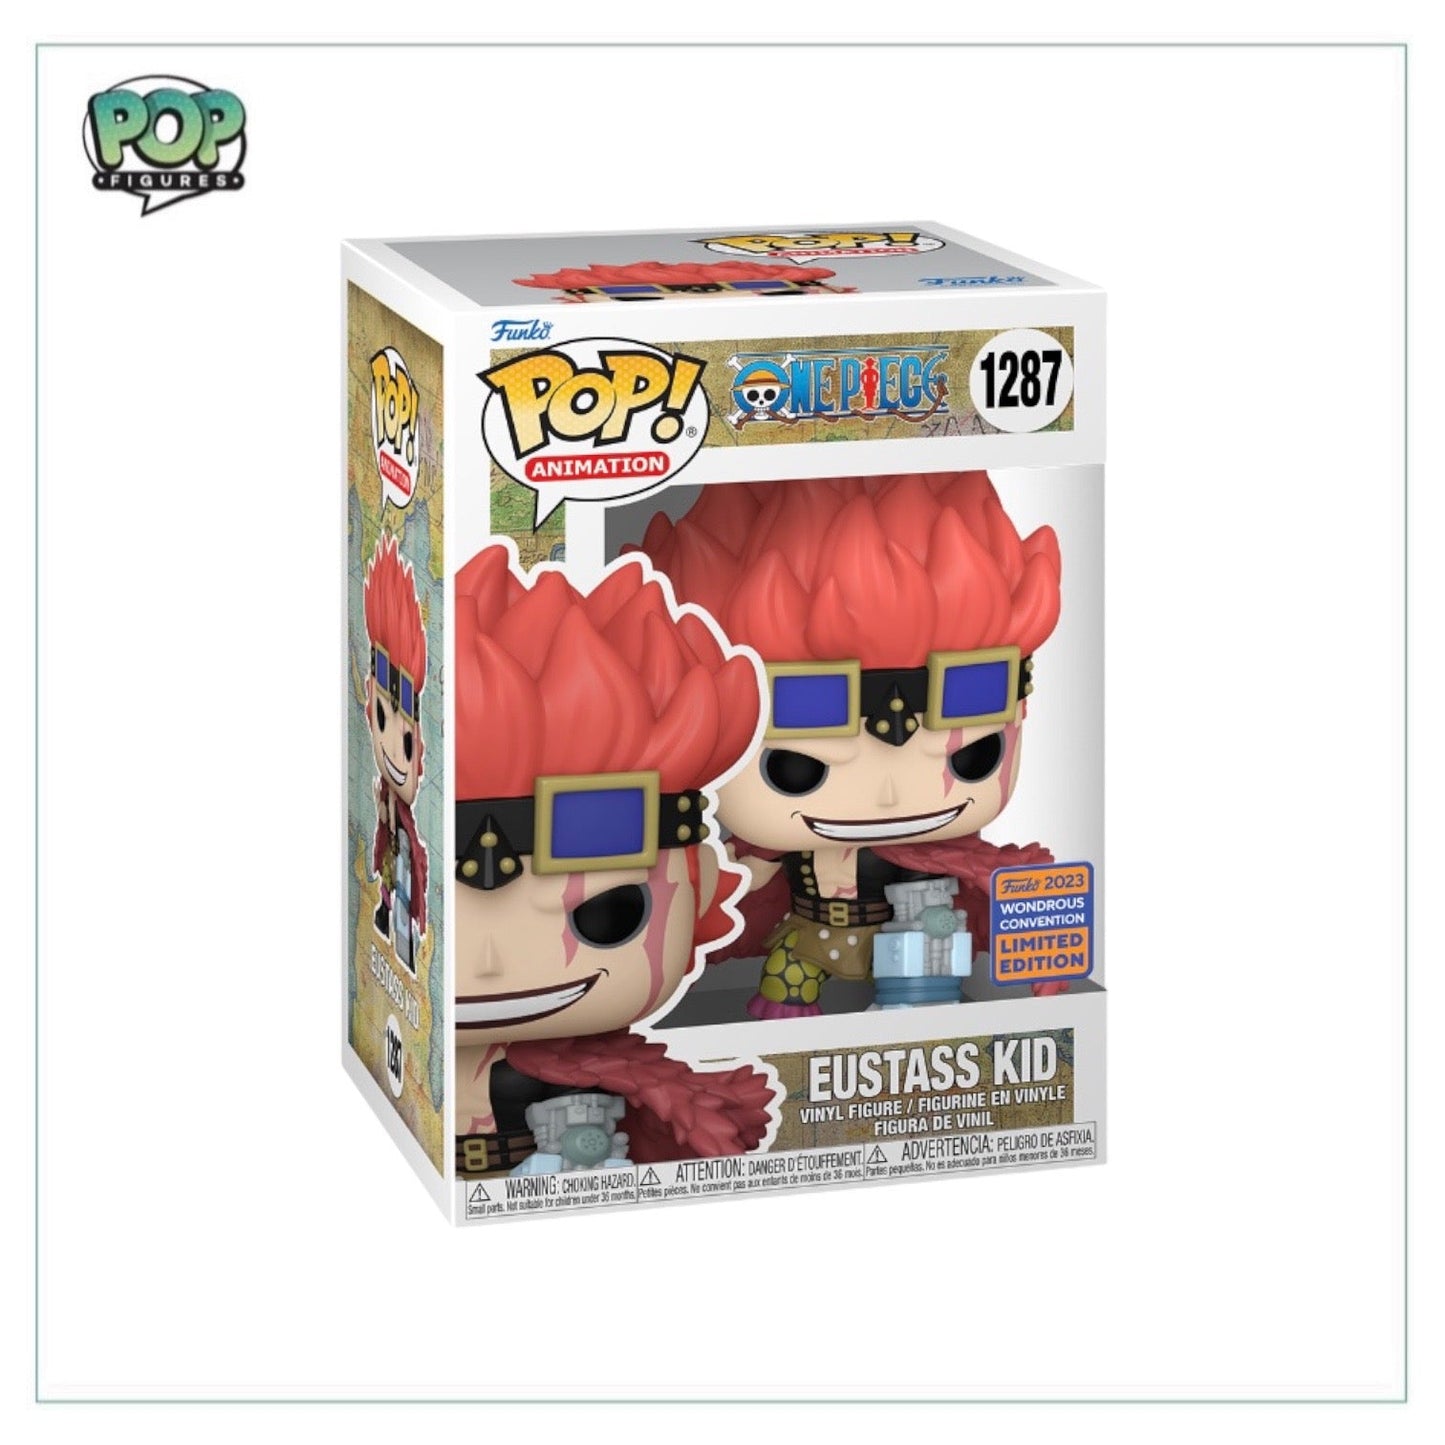 Eustass Kid #1287 Funko Pop! - One Piece - Wonder Con 2023 Shared Exclusive - Angry Cat